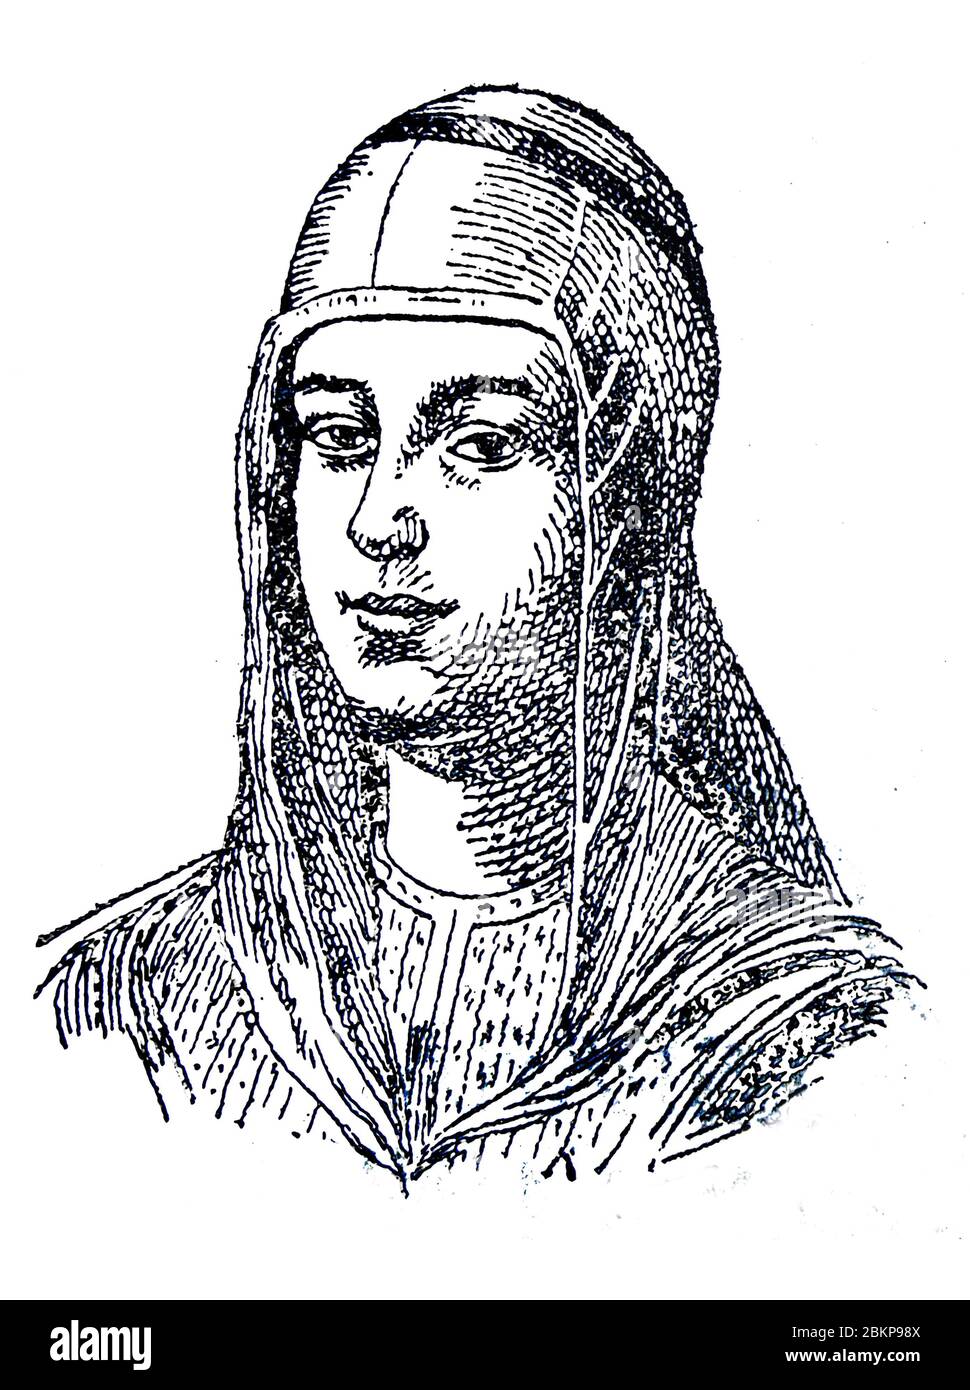 Portrait of Isabella I of Castile, Queen of Castile from 1474 and Queen consort of Aragon. Draw from Enciclopedia Autodidactica, Carles Dalmau,1954 Stock Photo